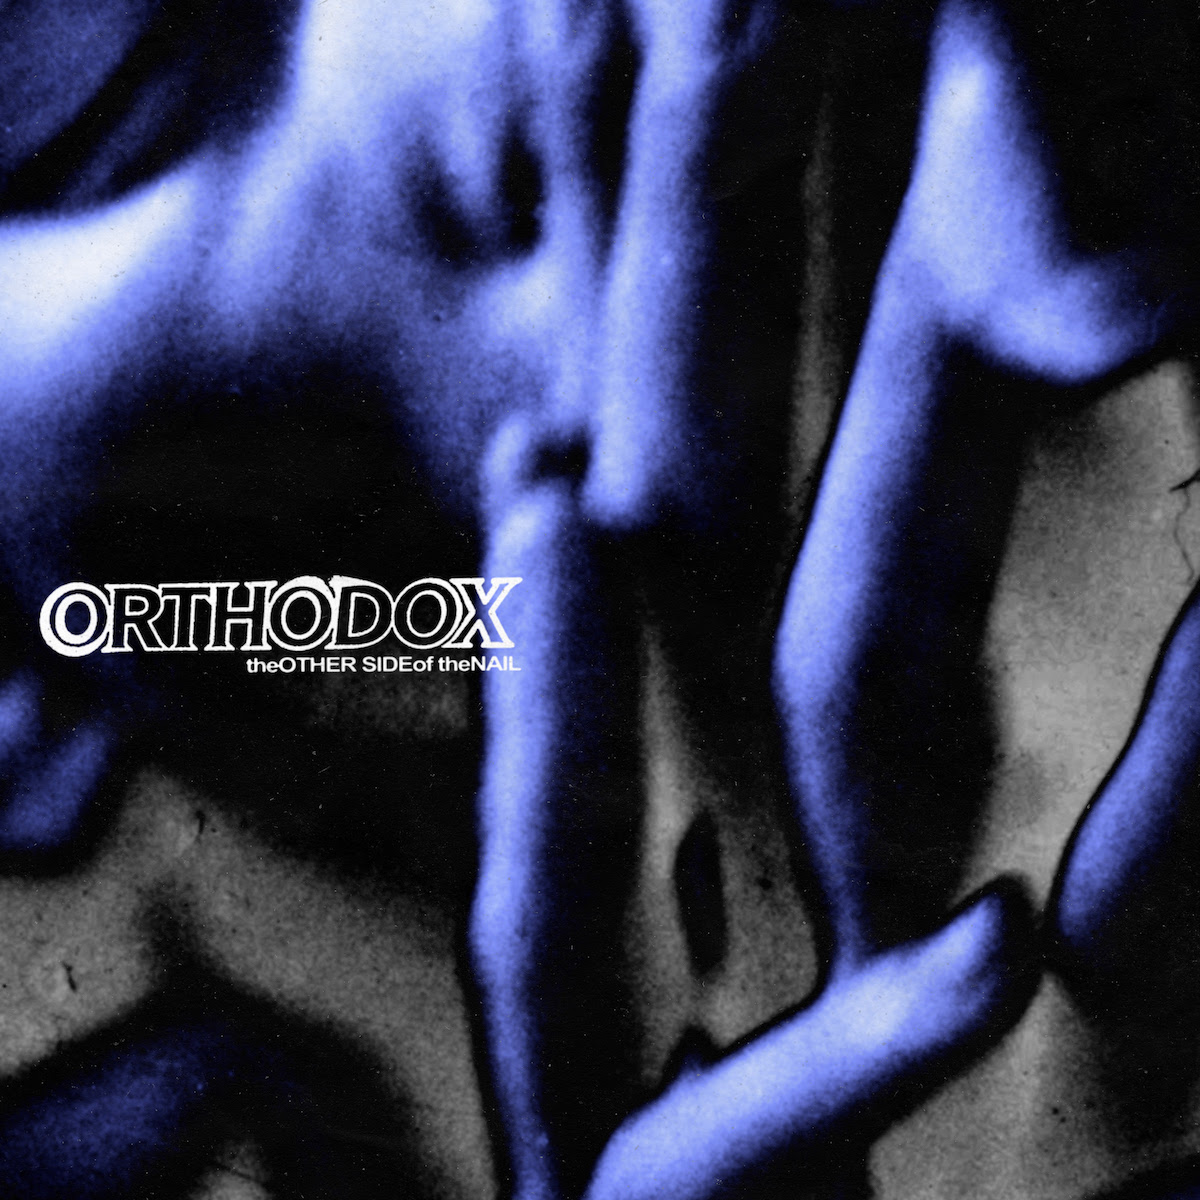 LISTEN: “The Other Side of the Nail” by Orthodox